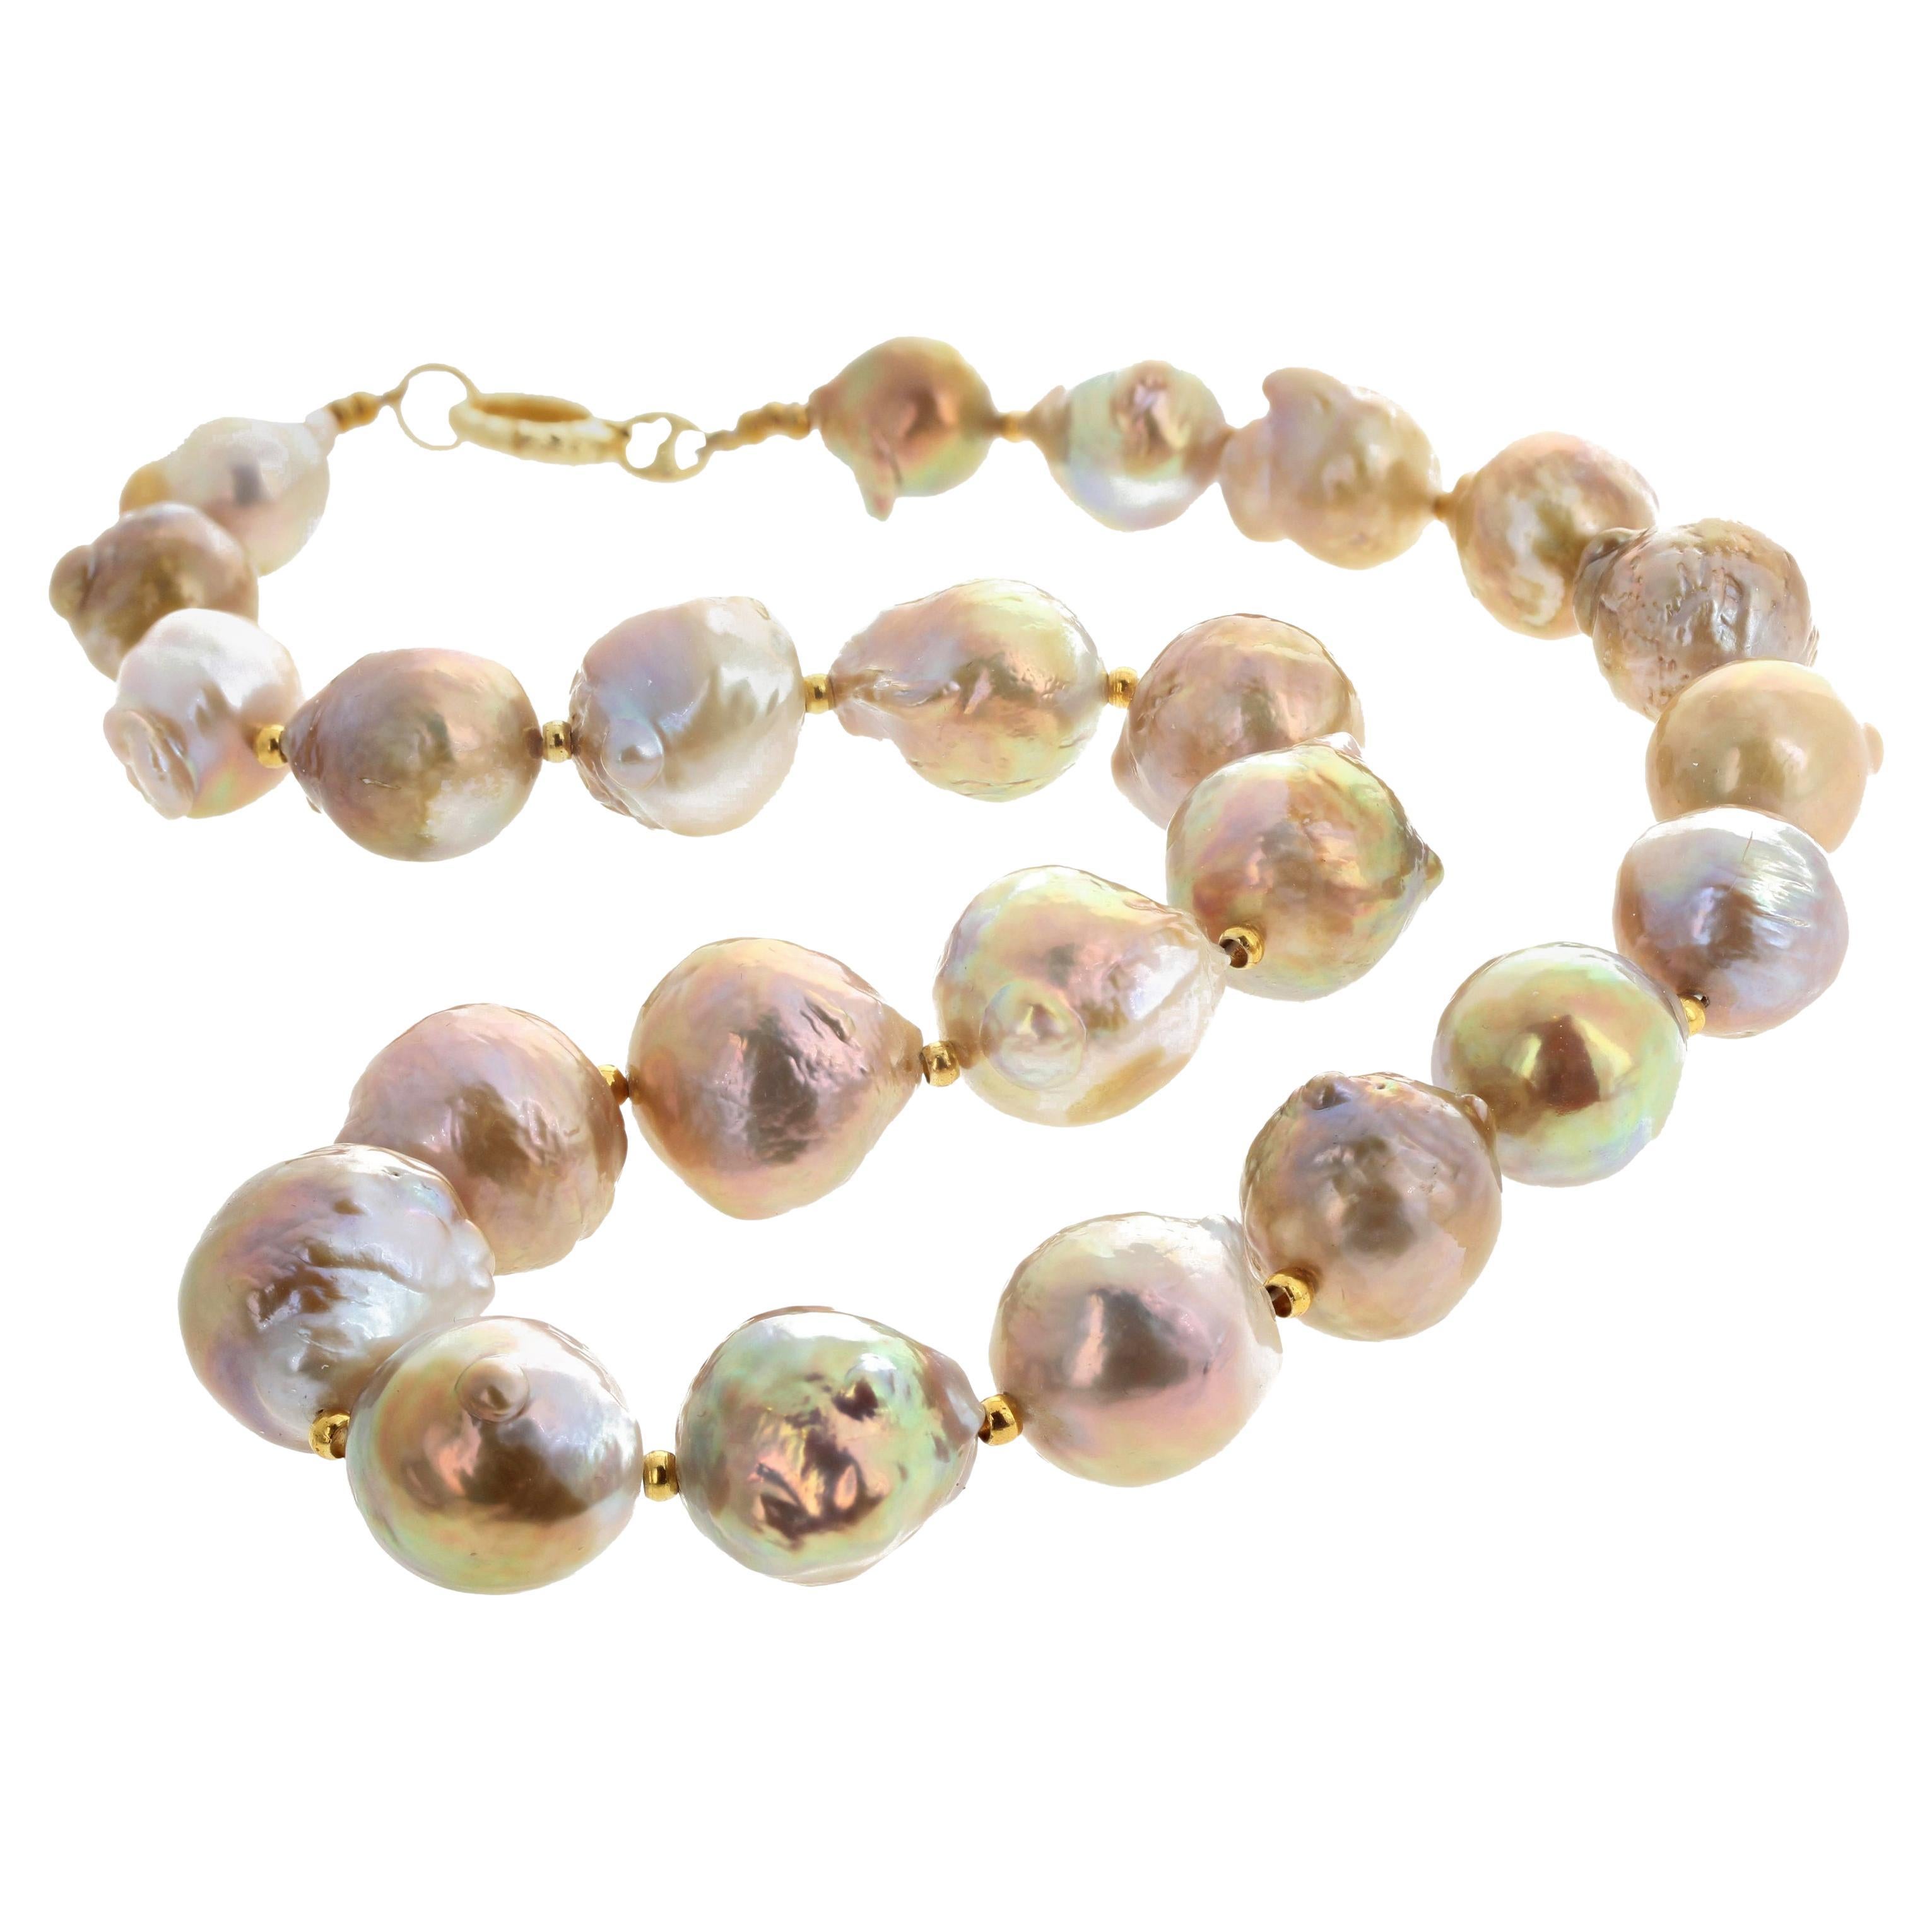 AJD Glowing 17" Long Large Real Natural Cultured 18mm Pearls Necklace For Sale